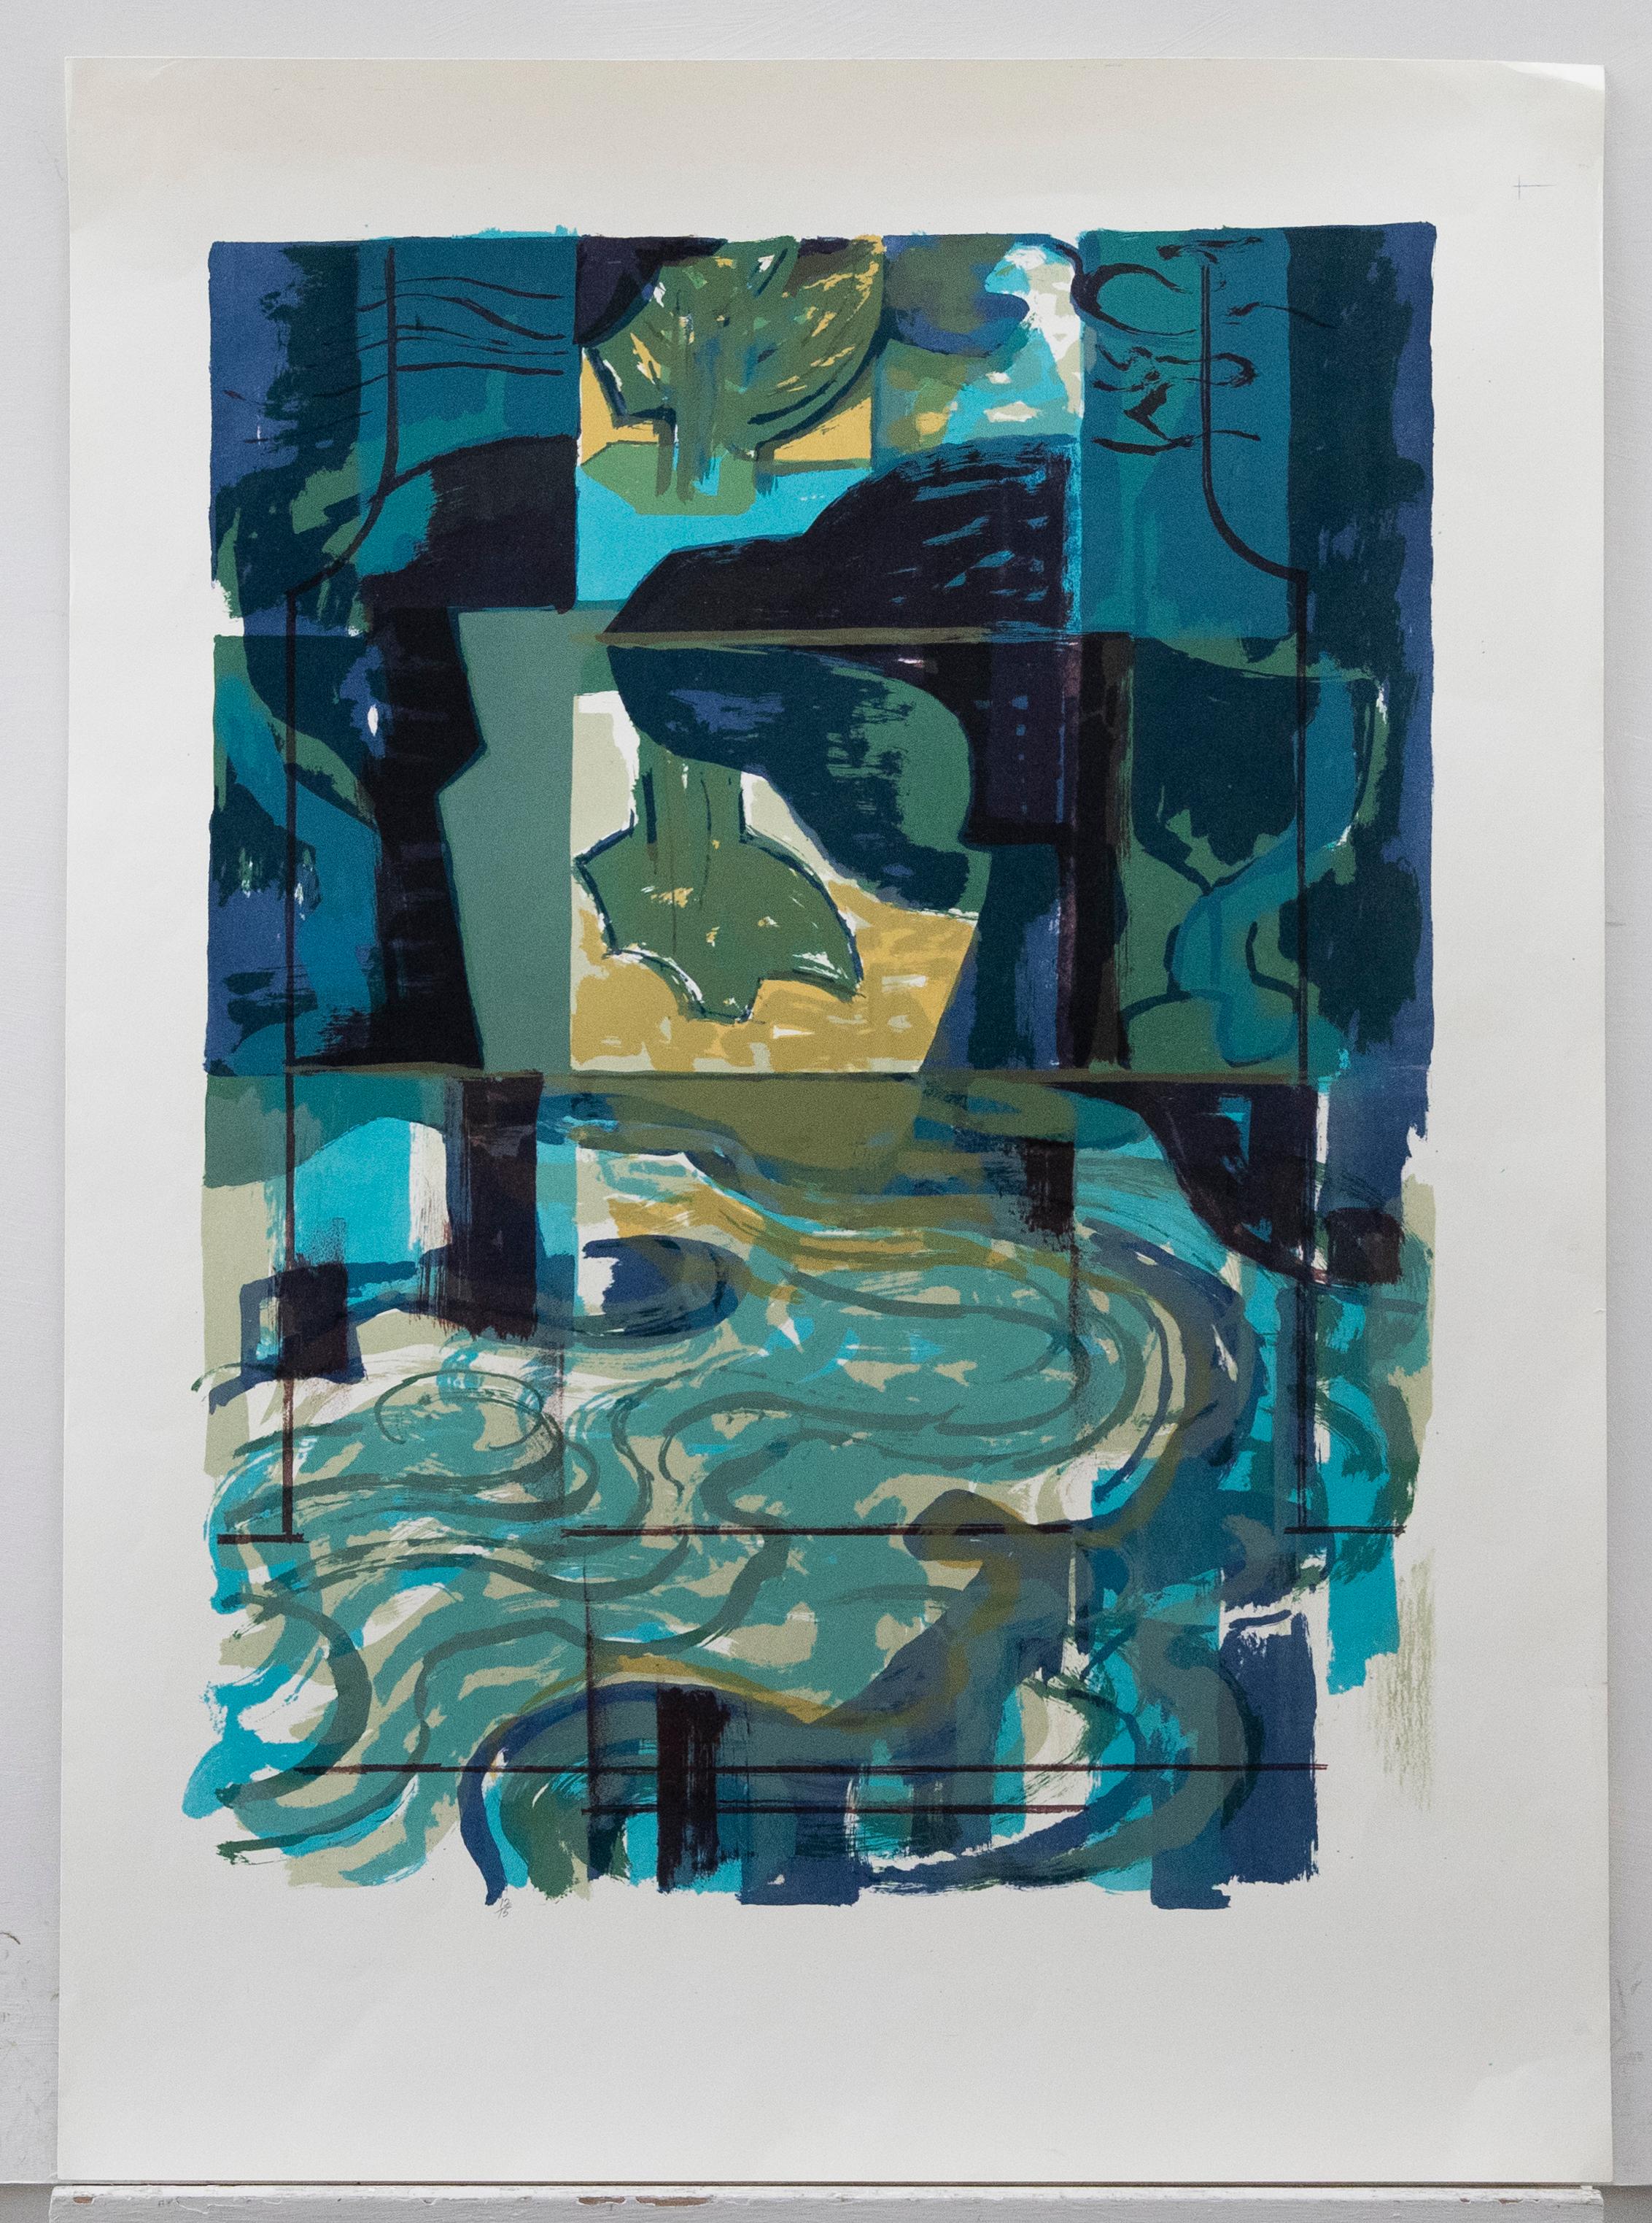 A striking abstract scene with swirling natural forms in blue and green. Numbered 12/15. Unsigned. On paper. 